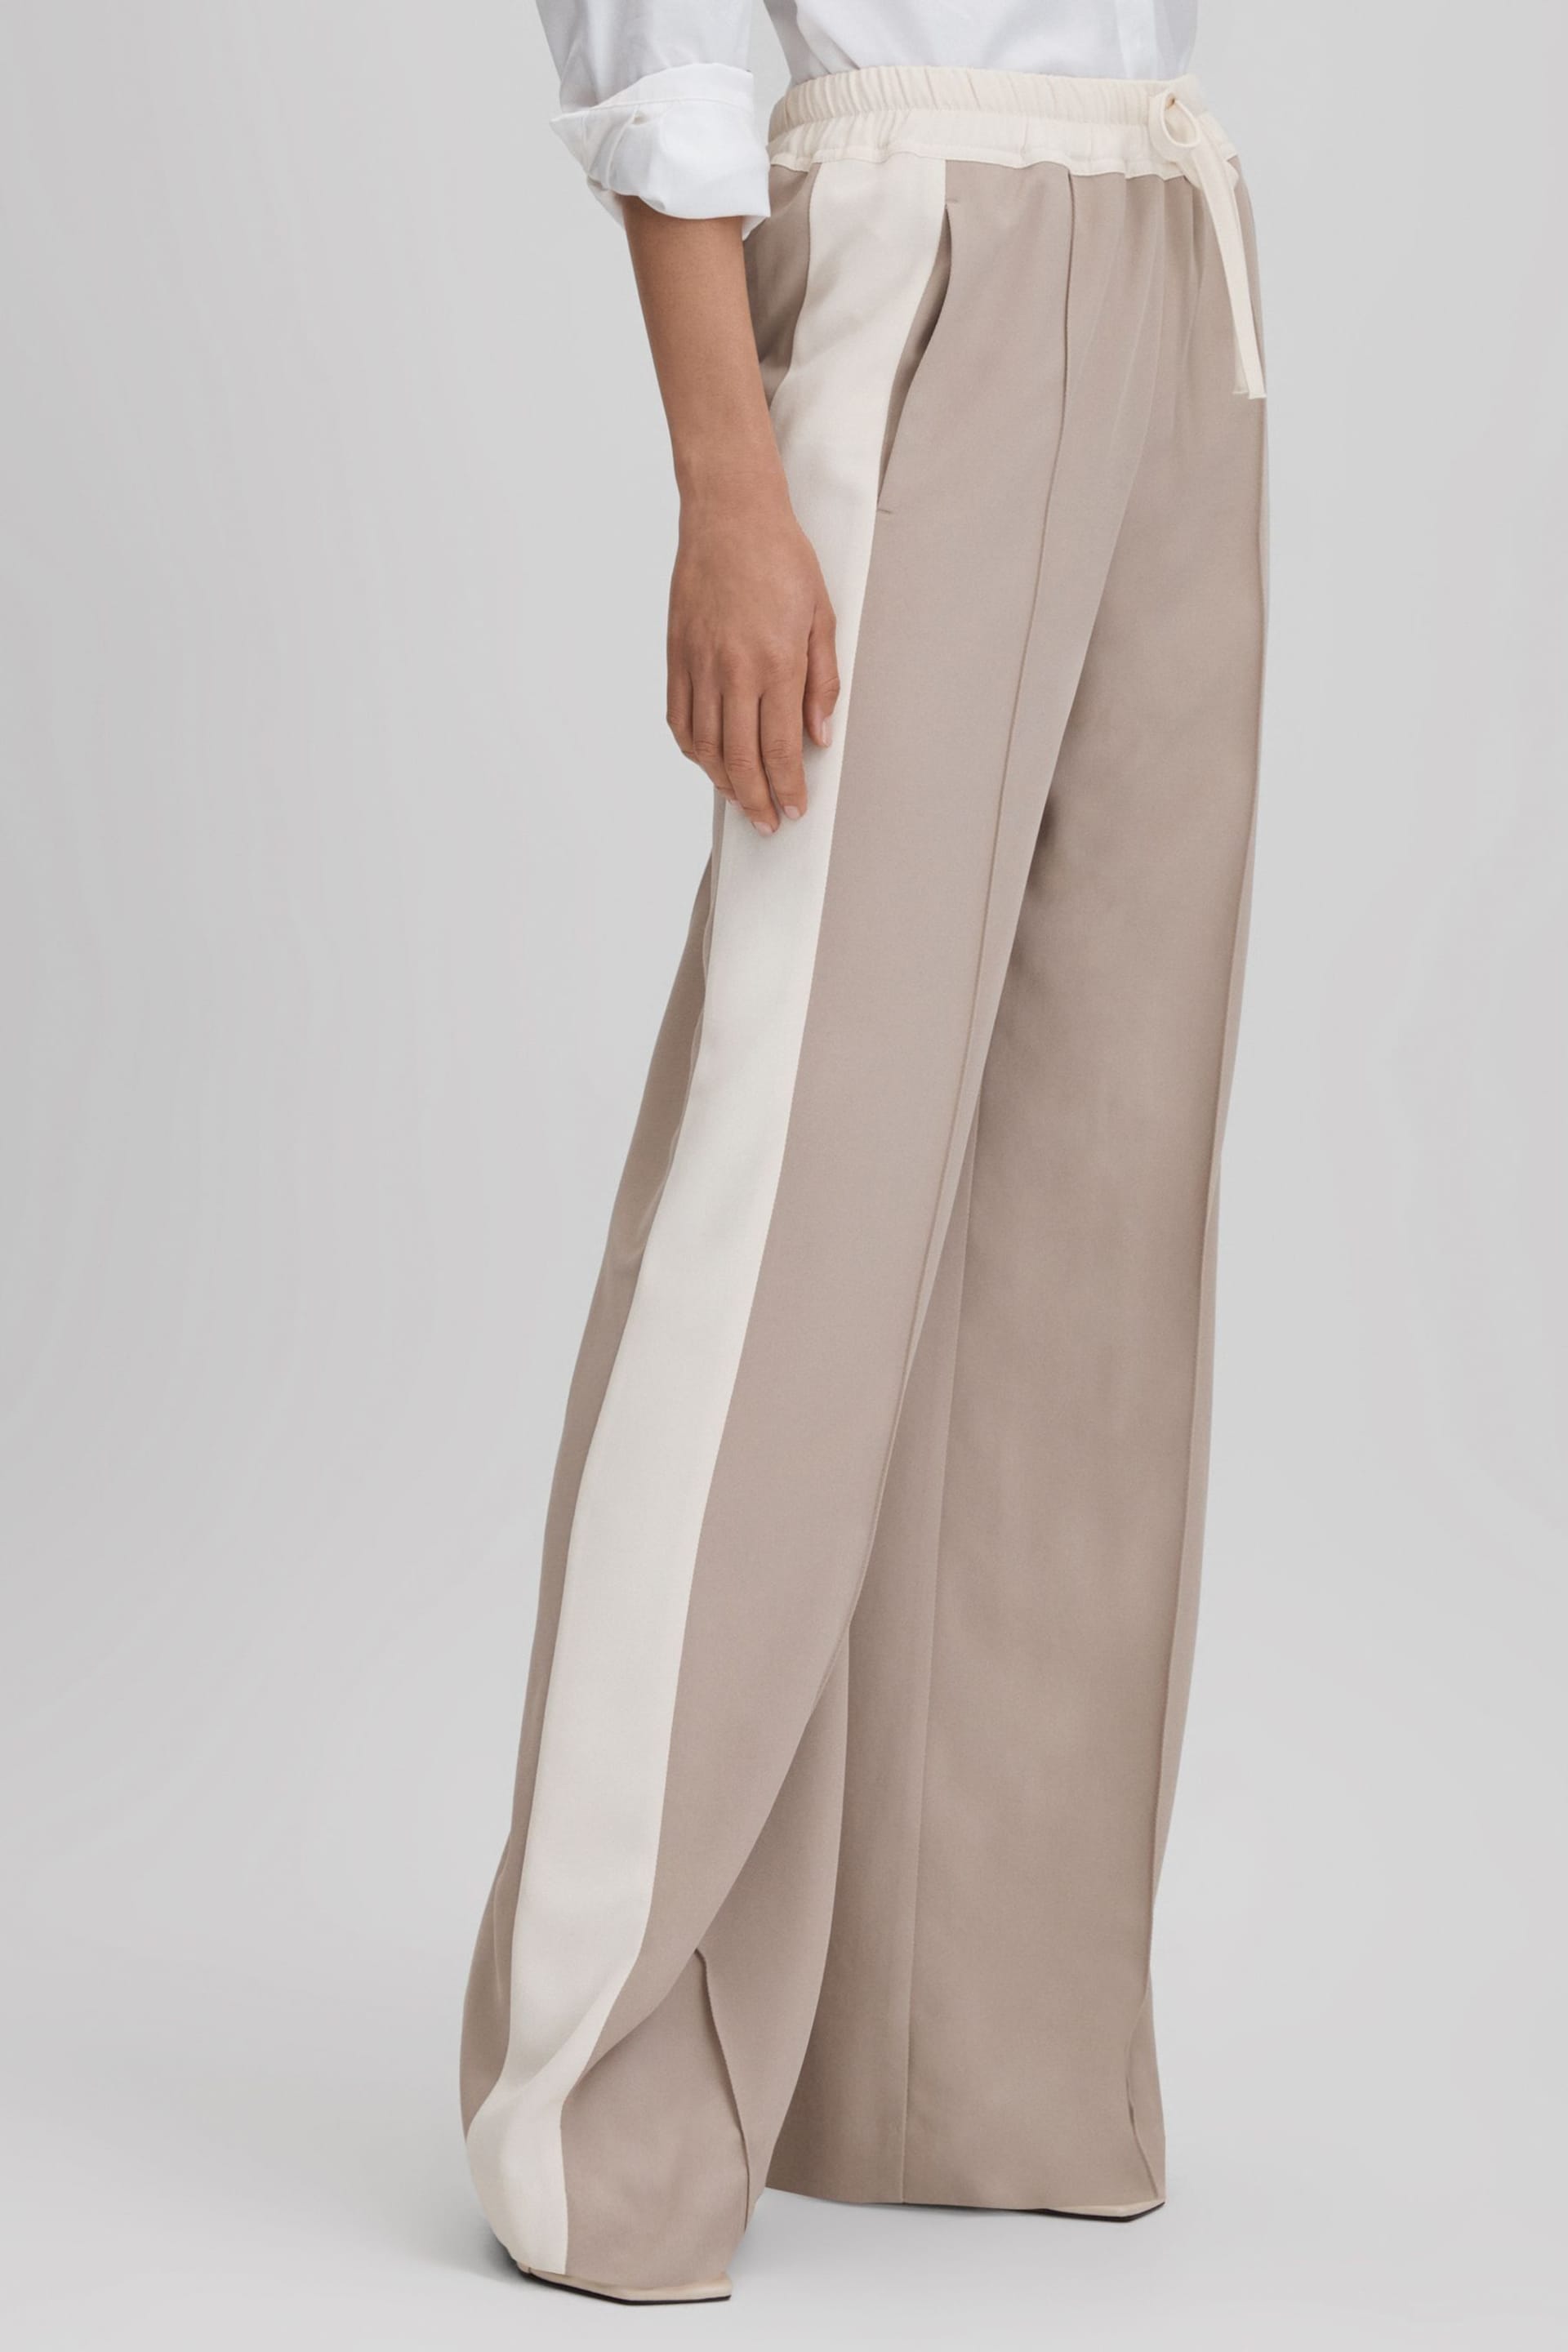 Reiss Natural May Wide Petite Wide Leg Contrast Stripe Drawstring Trousers - Image 3 of 7